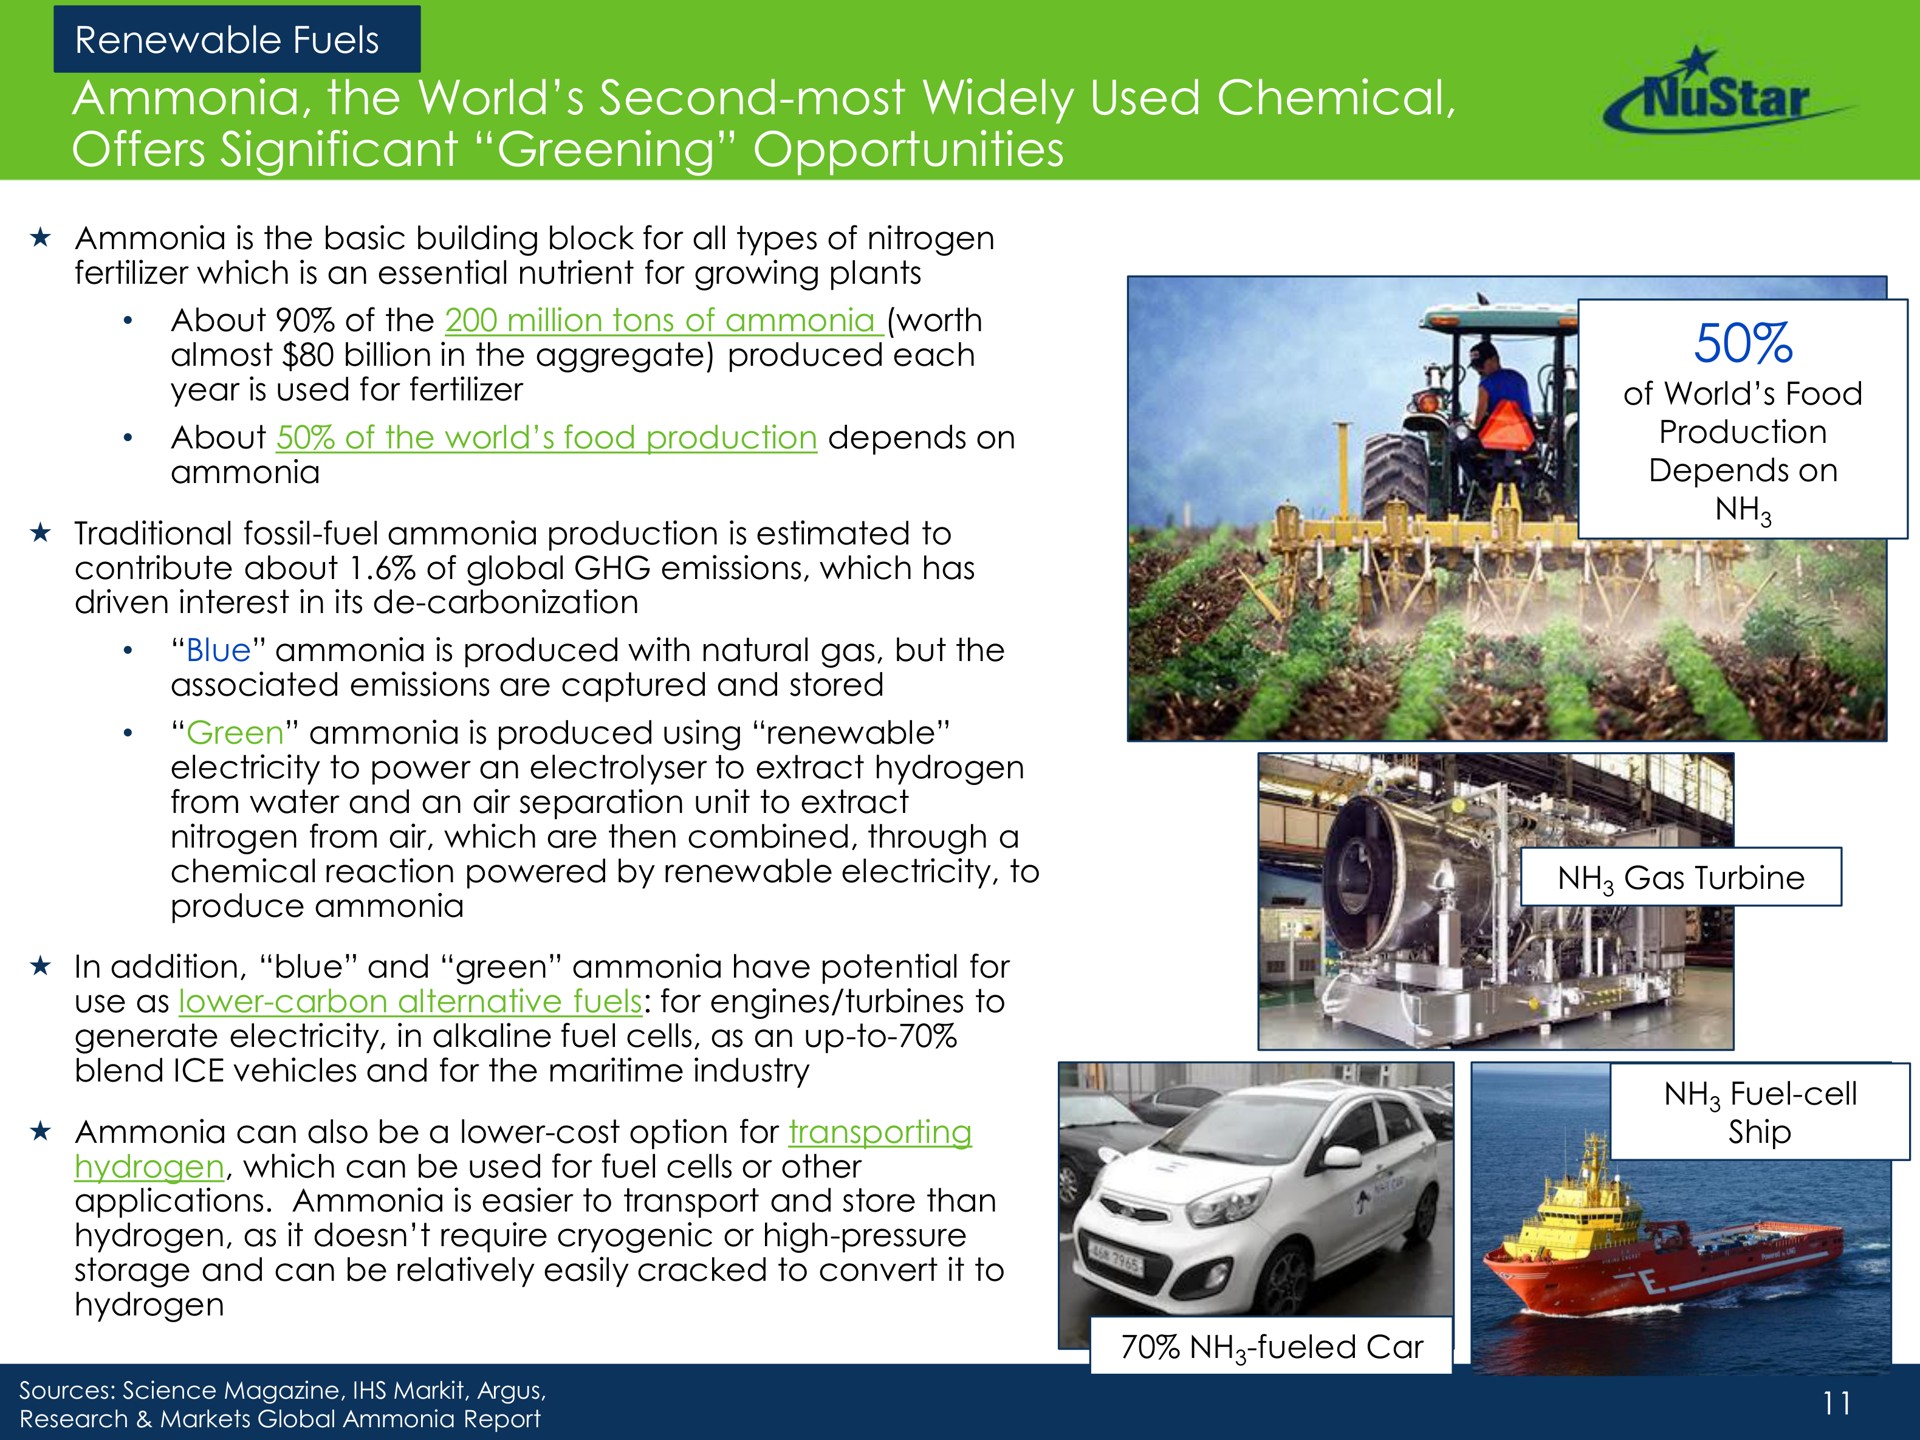 ammonia the world second most widely used chemical offers significant greening opportunities | NuStar Energy